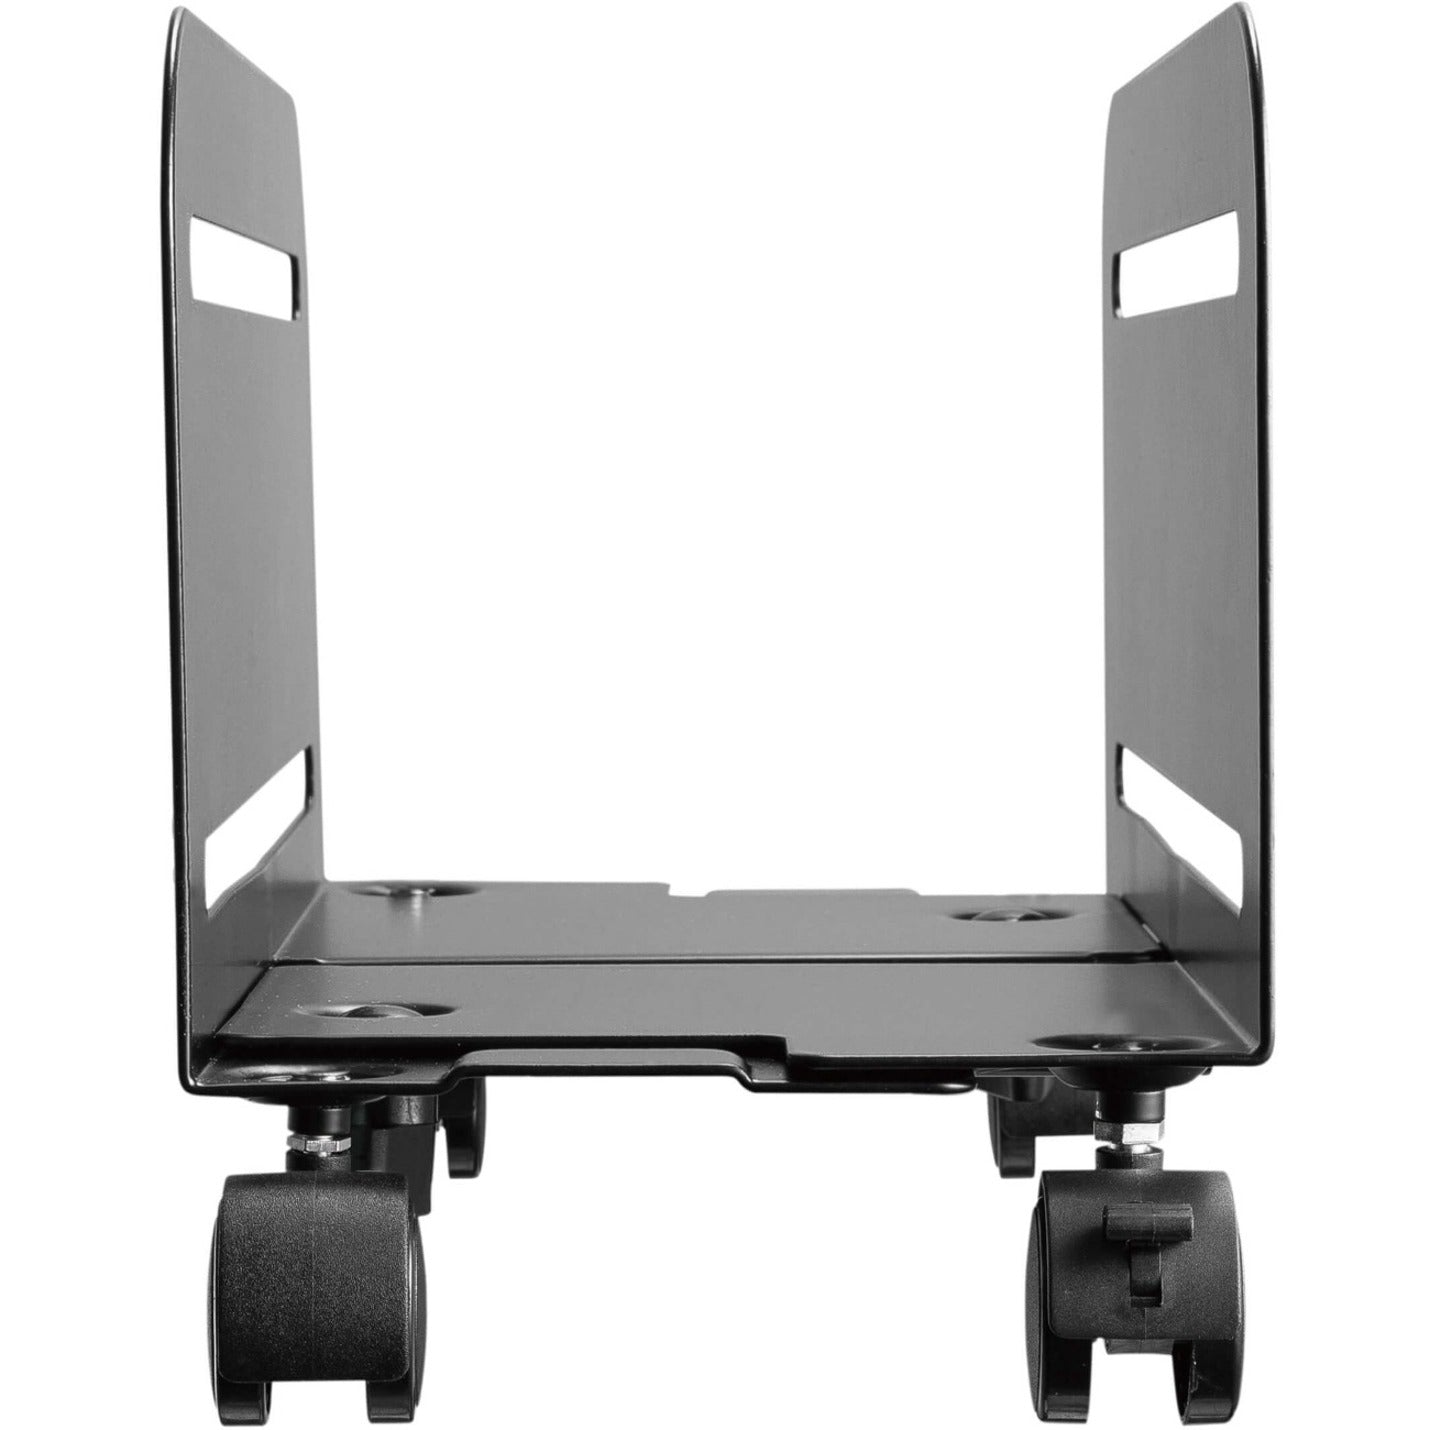 Tripp Lite DCPU2 Mobile CPU Caddy for Computer Towers - Width Adjustable, Locking Casters, Black